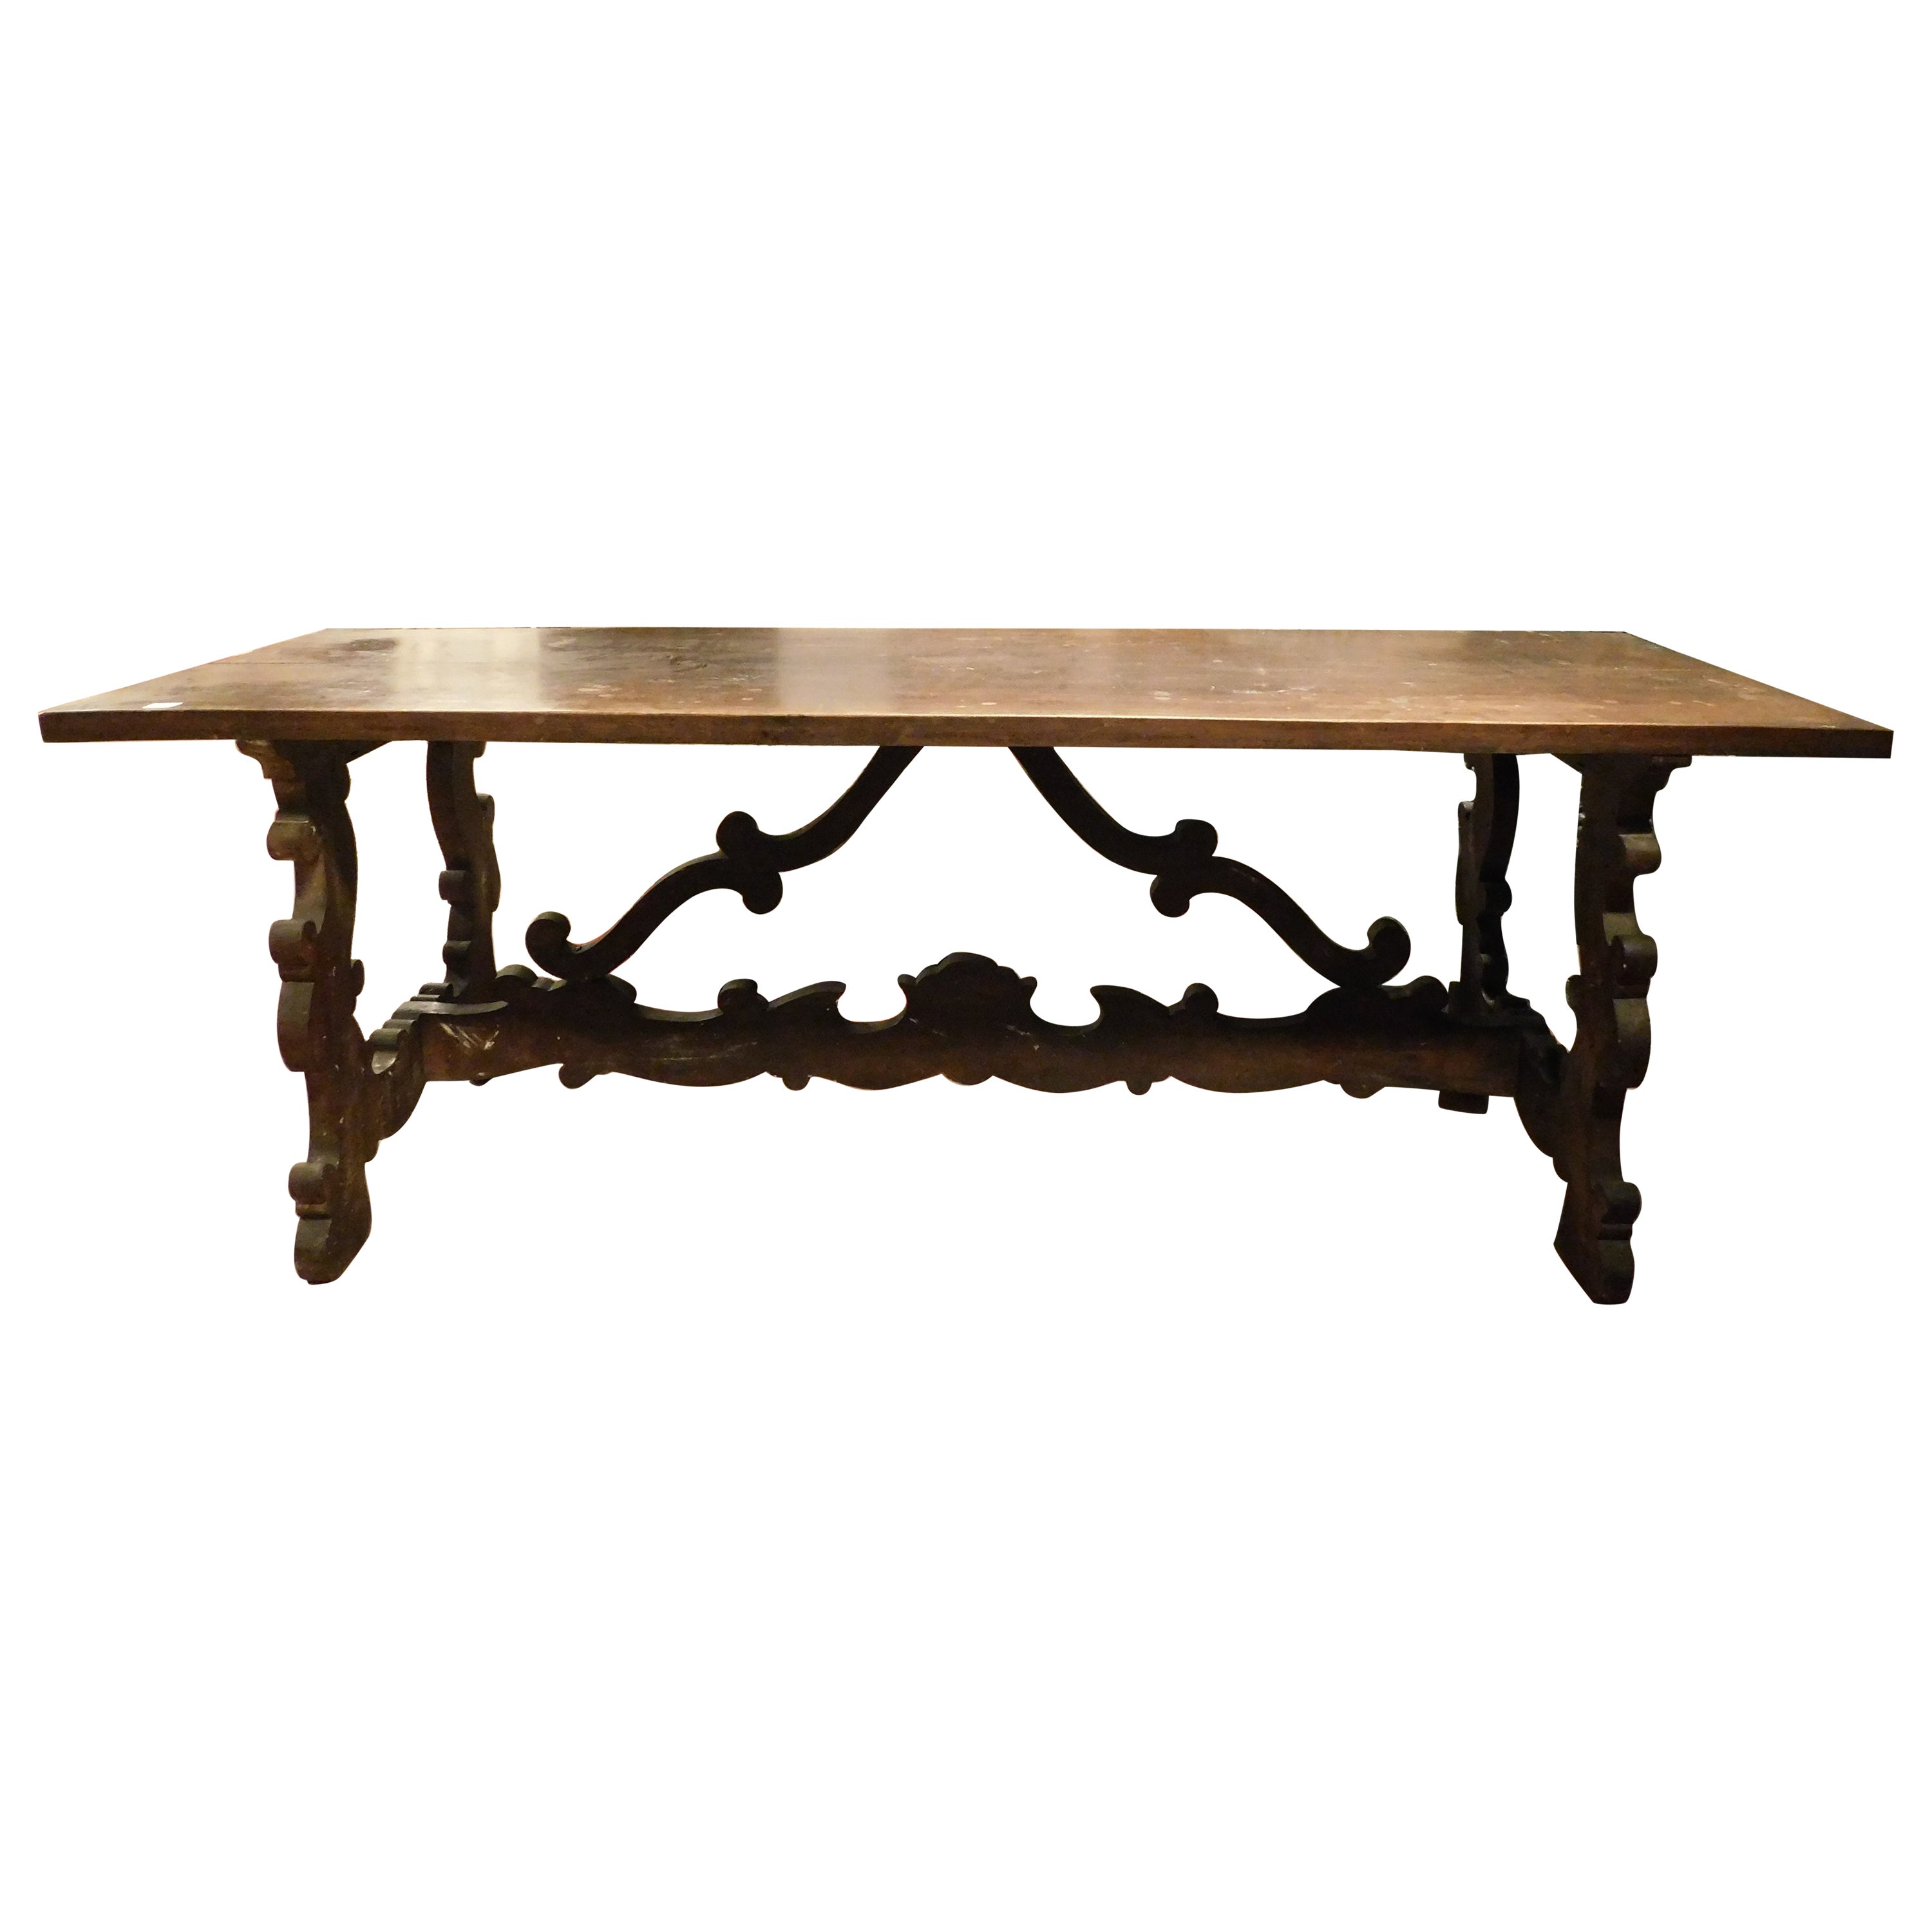 Old refectory table in walnut with wavy legs , dinner table For Sale